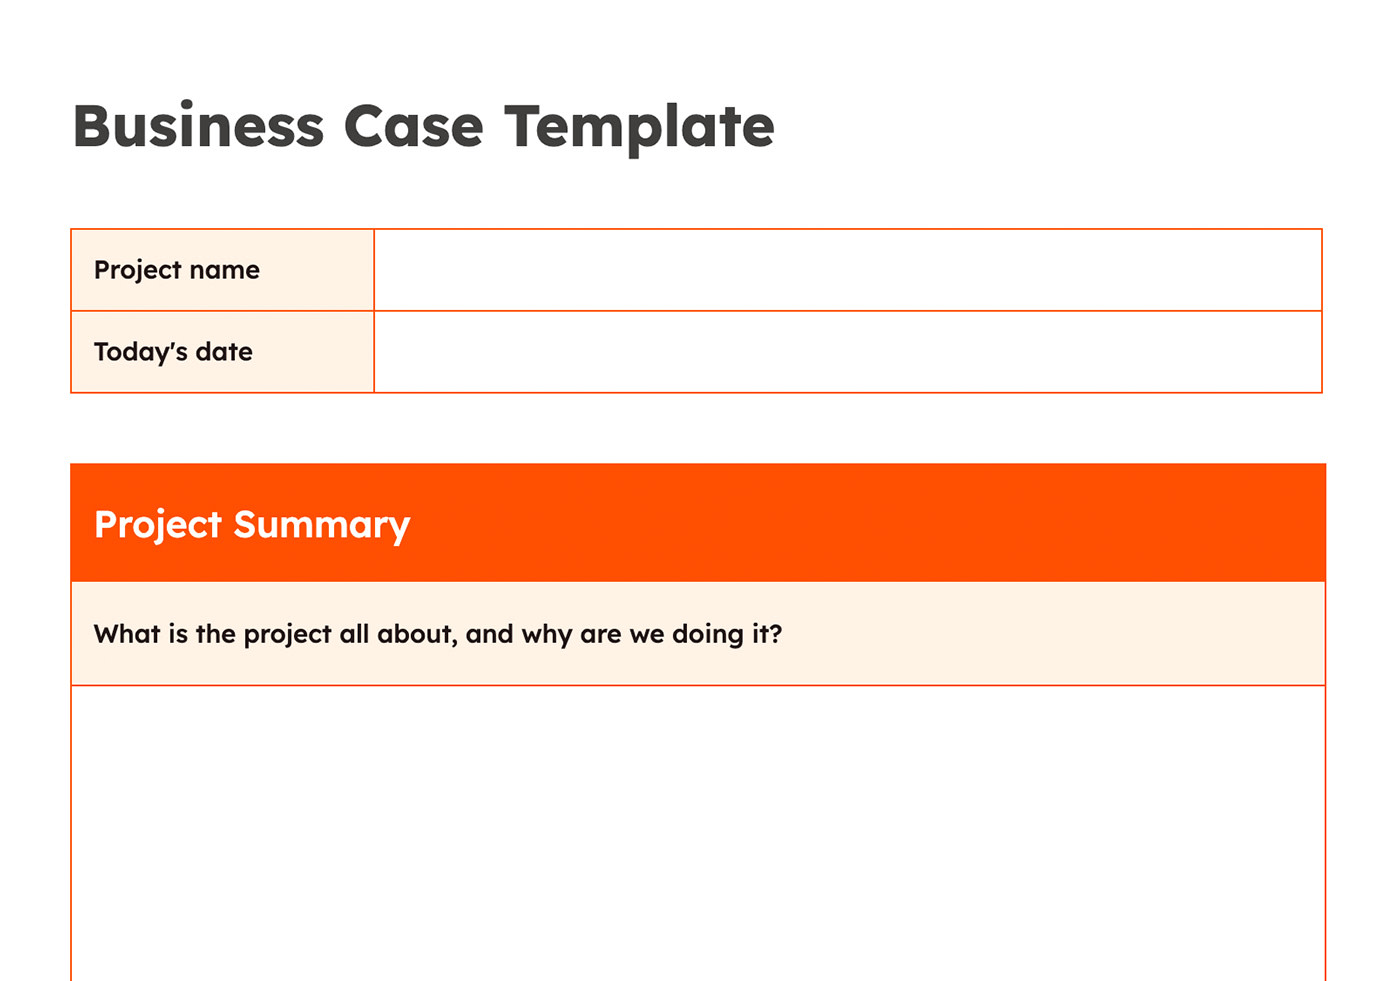 Screenshot of a business case project template